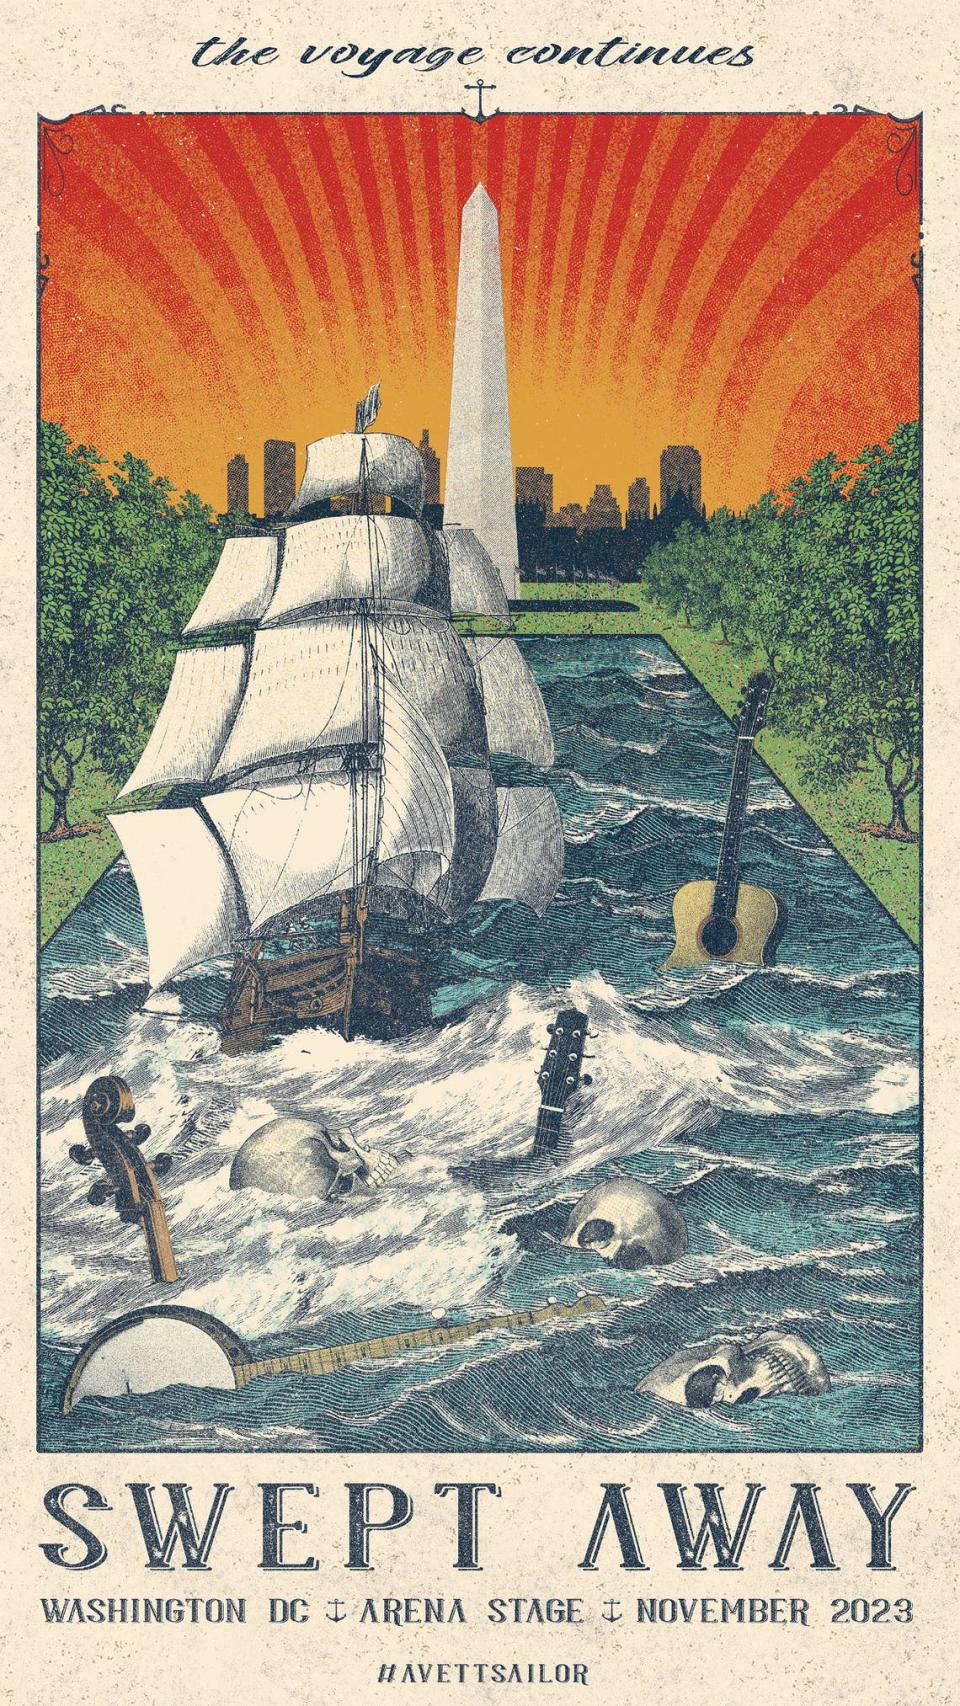 The Avett Brothers commissioned this poster by Tortuga Design Studio for the “Swept Away” run at Arena Stage in Washington, D.C.